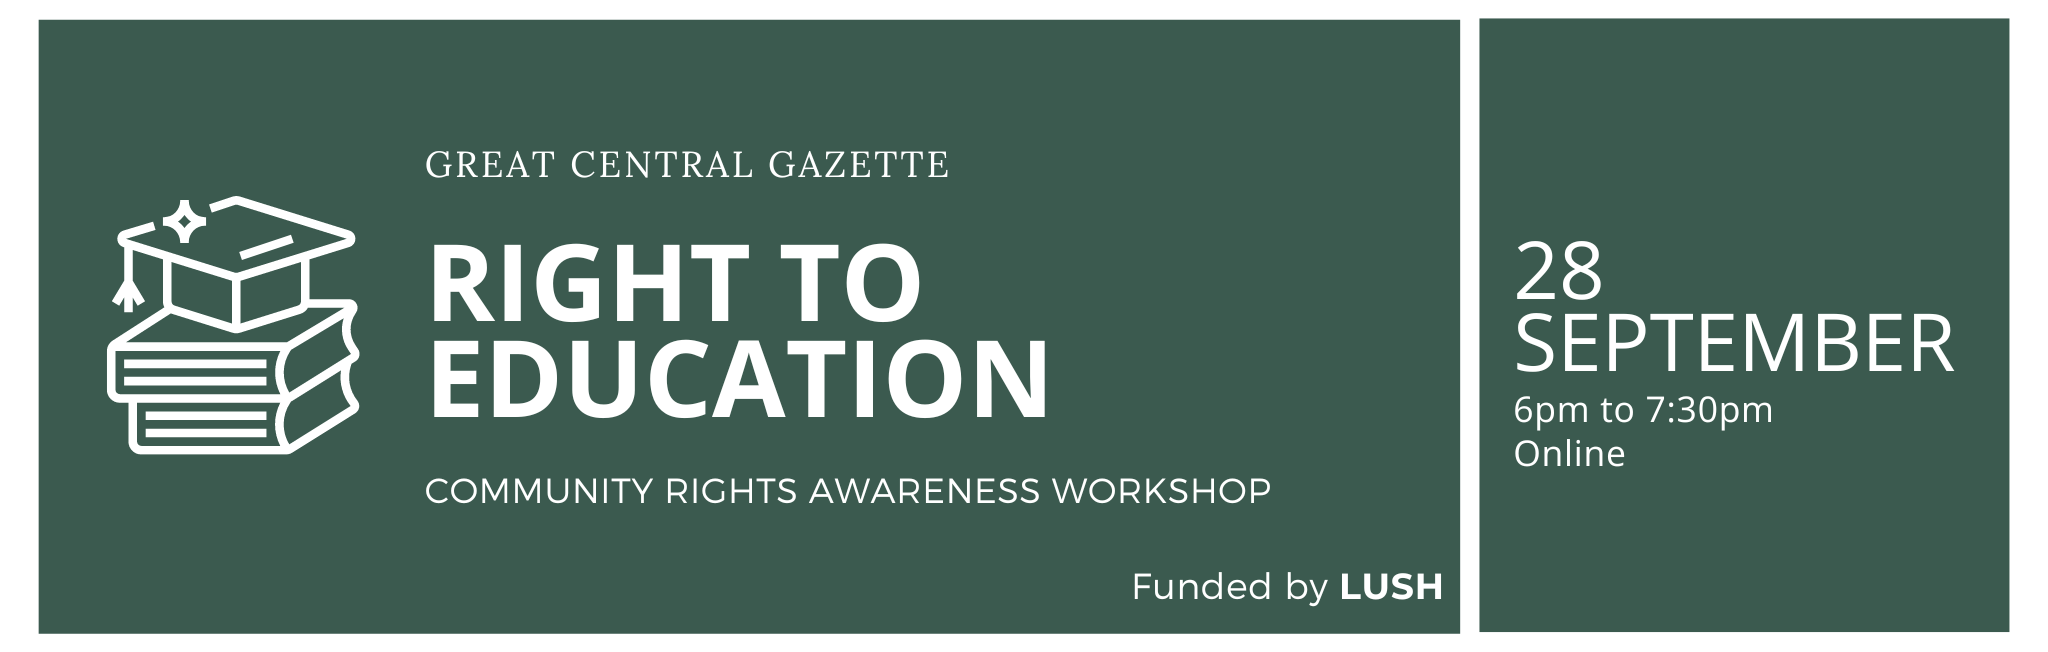 Right to education COMMUNITY RIGHTS AWARENESS WORKSHOP GREAT CENTRAL GAZETTE Funded by LUSH 28 September 6pm to 7:30pm Online